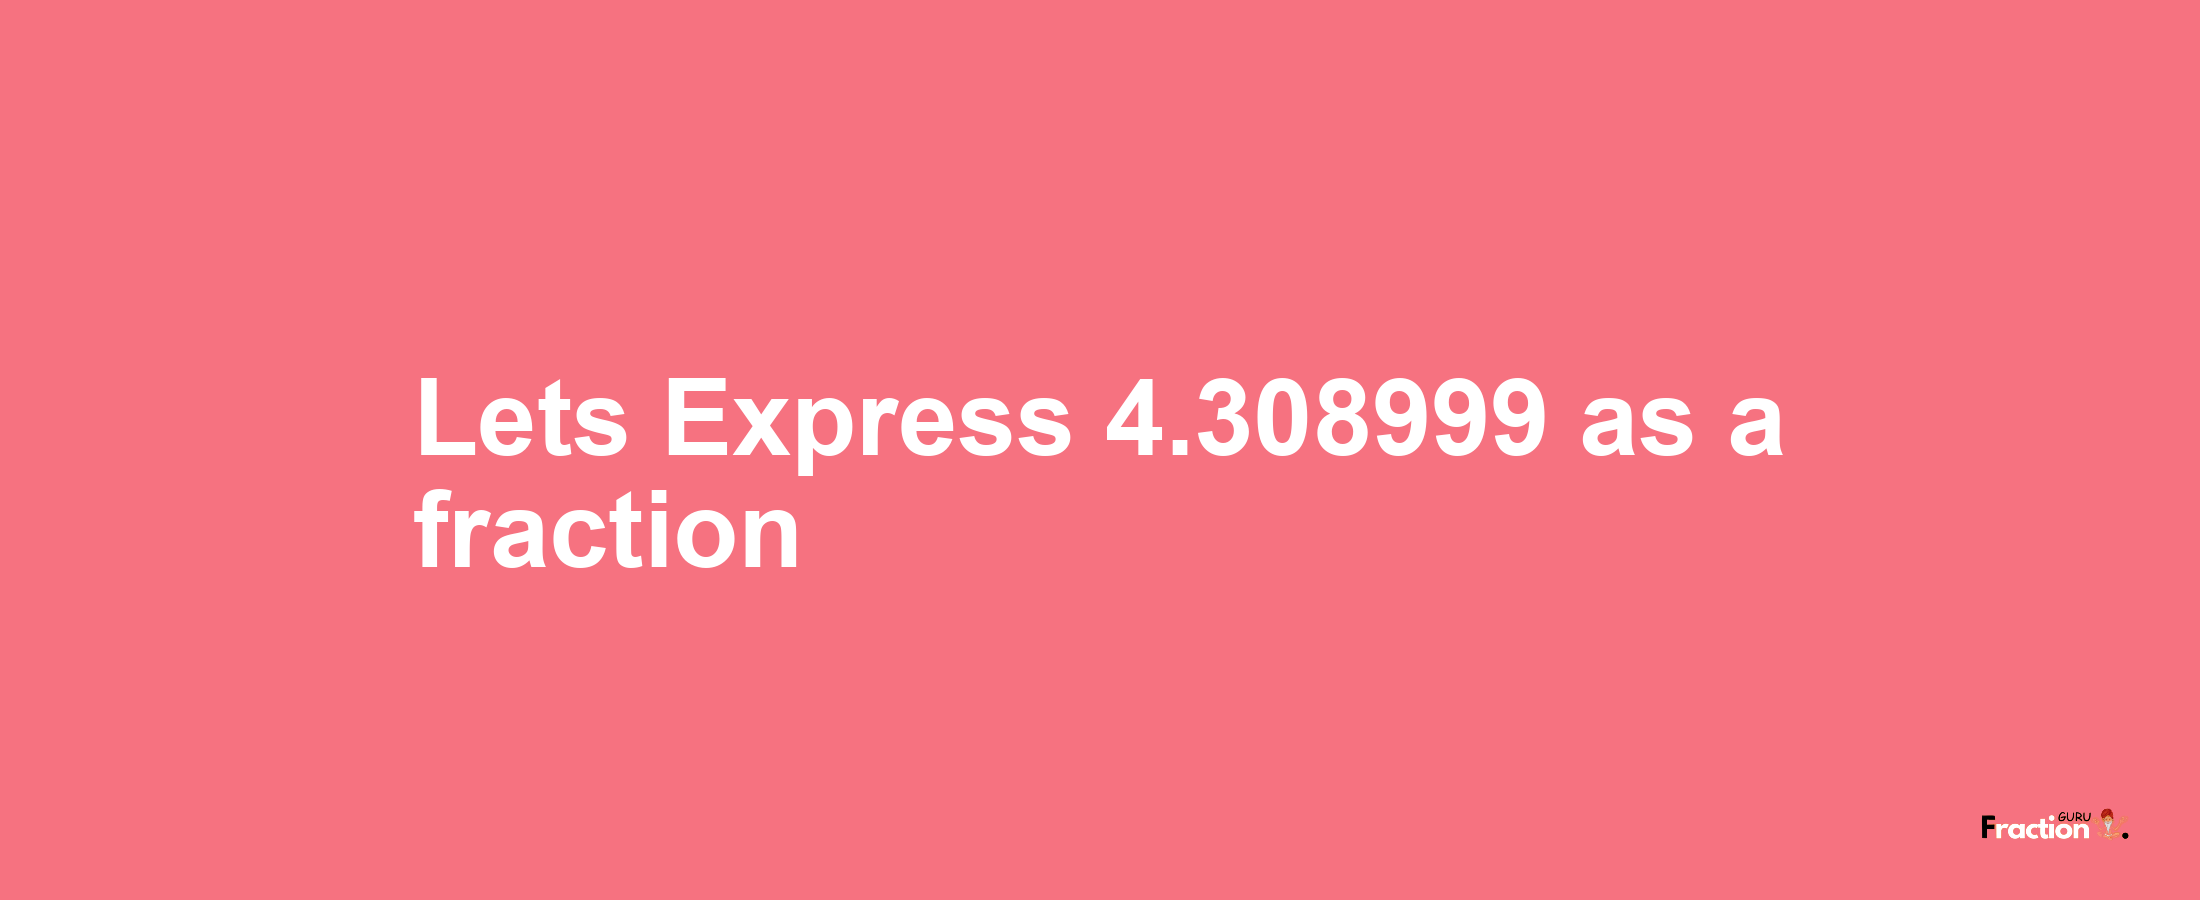 Lets Express 4.308999 as afraction